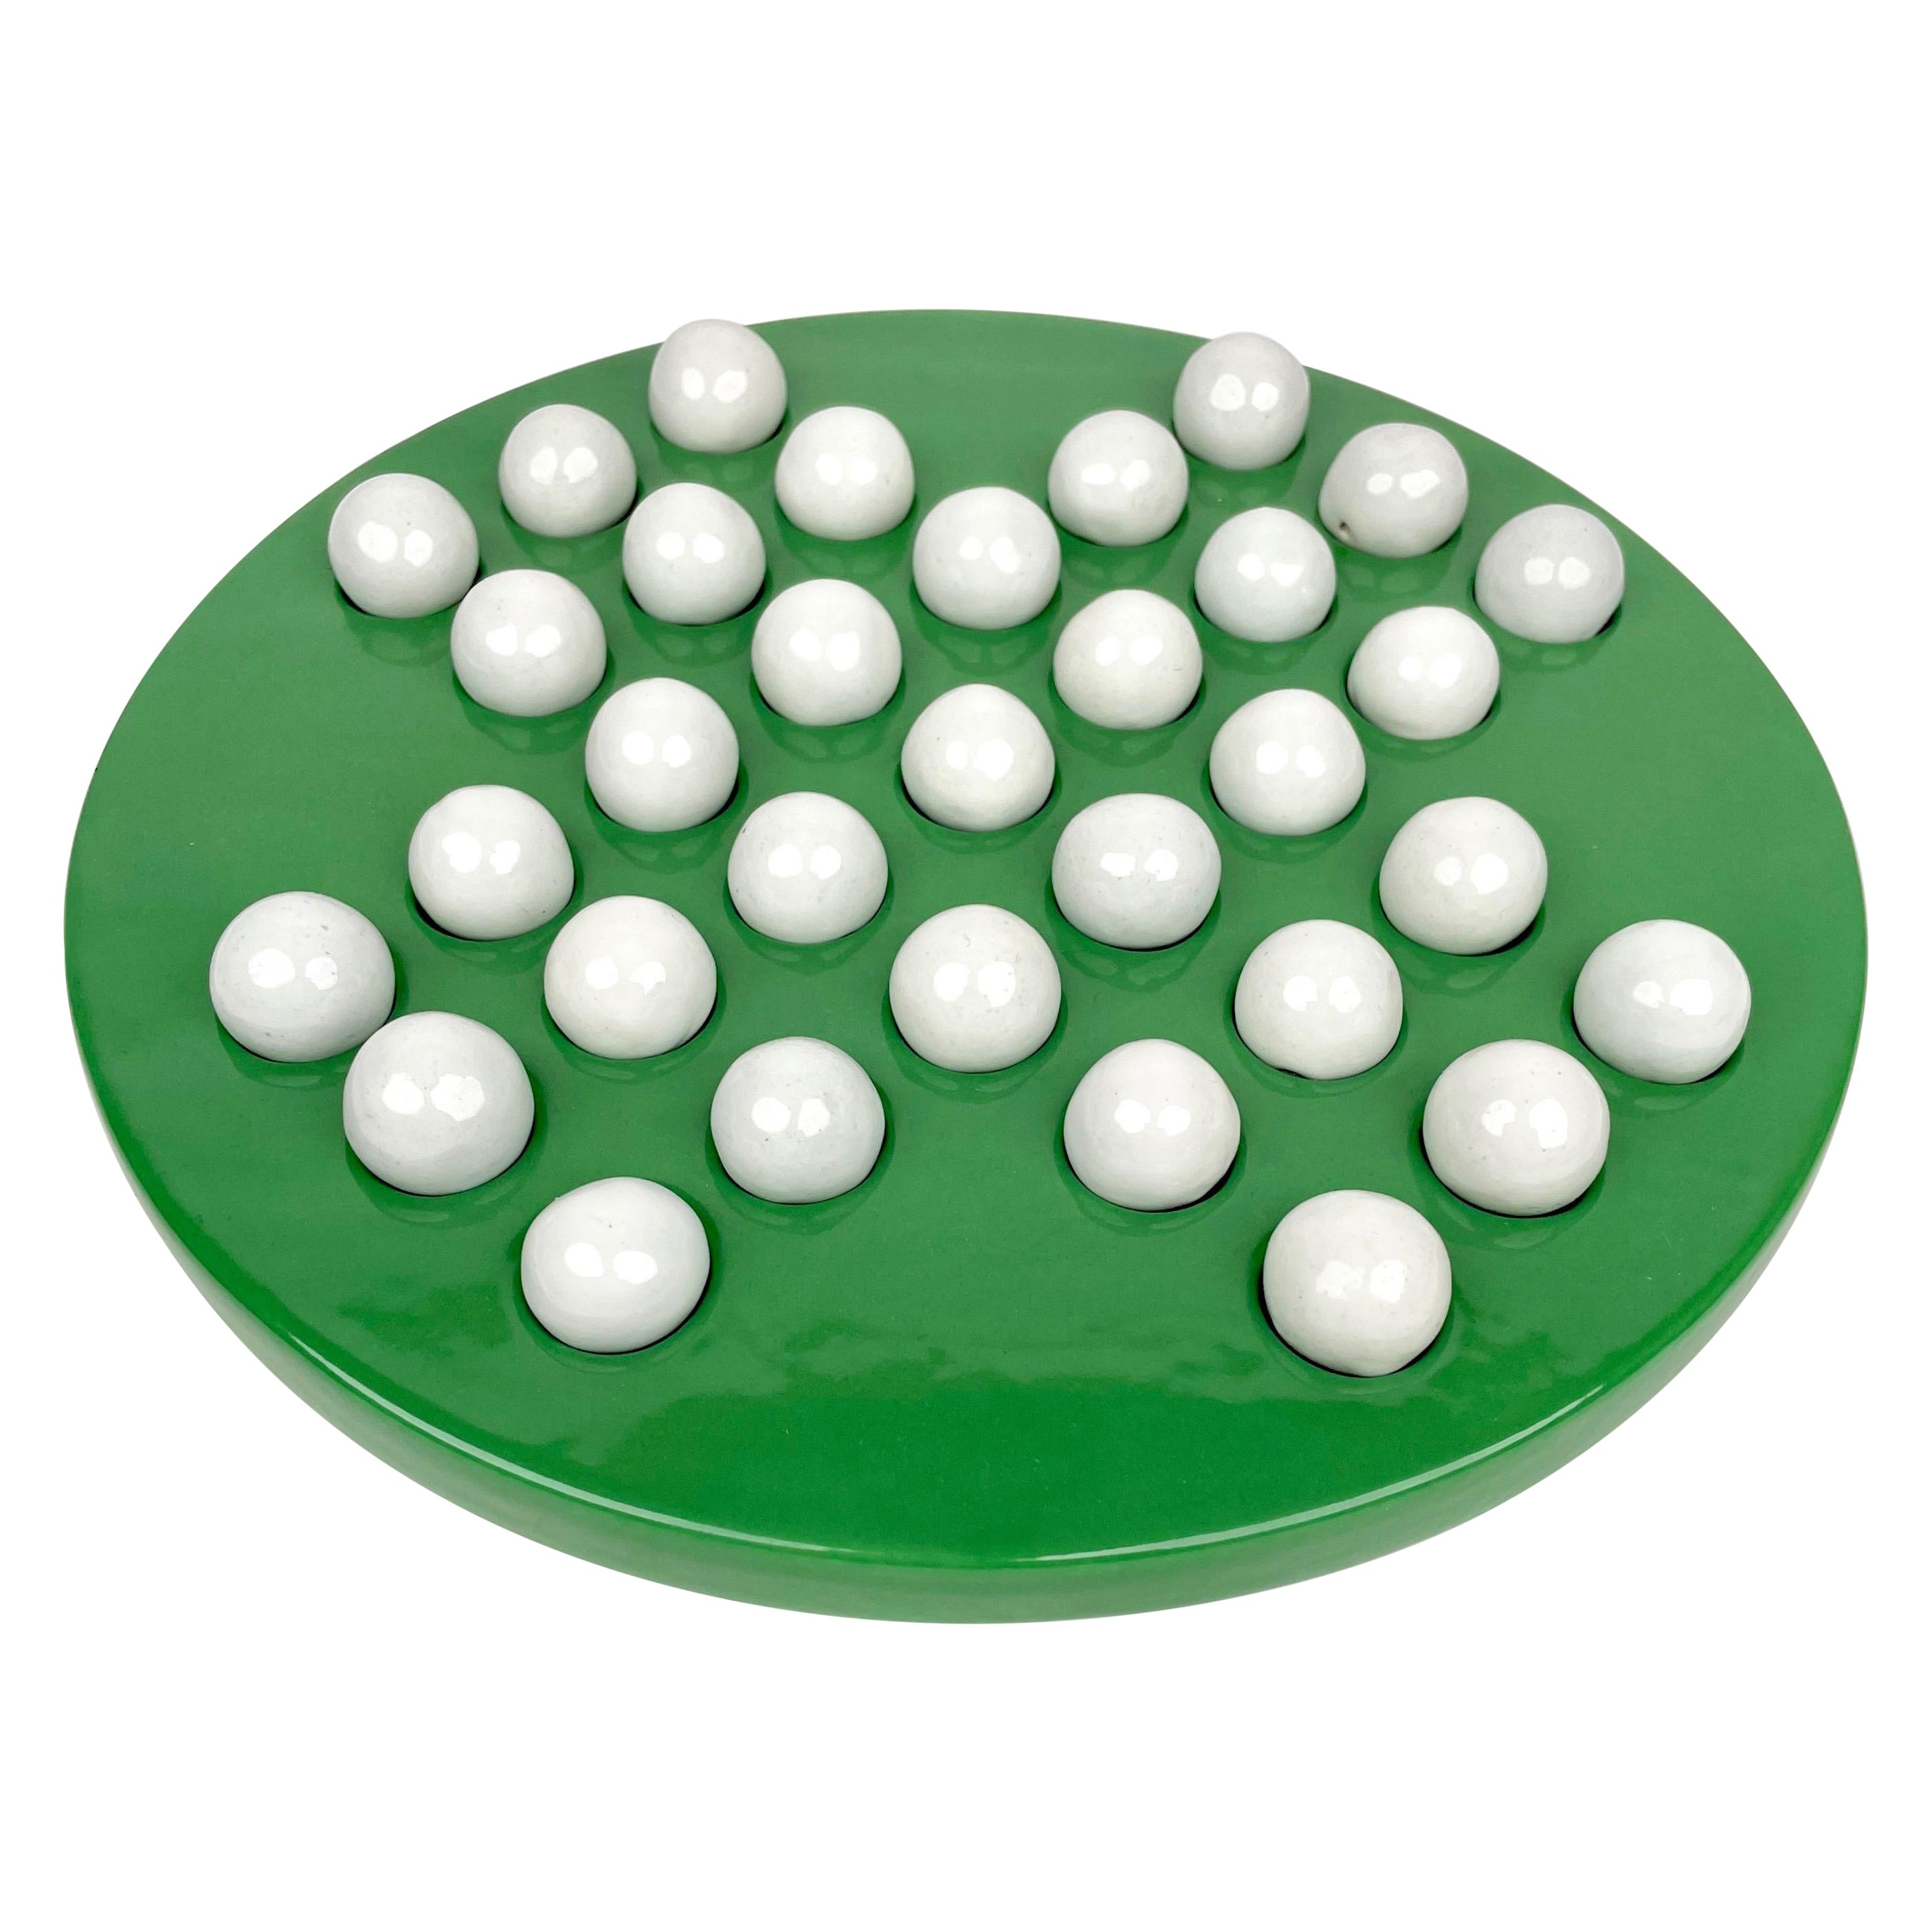 Checkers Game by Ennio Lucini for Gabbianelli Green & White Ceramic, Italy 1970s For Sale